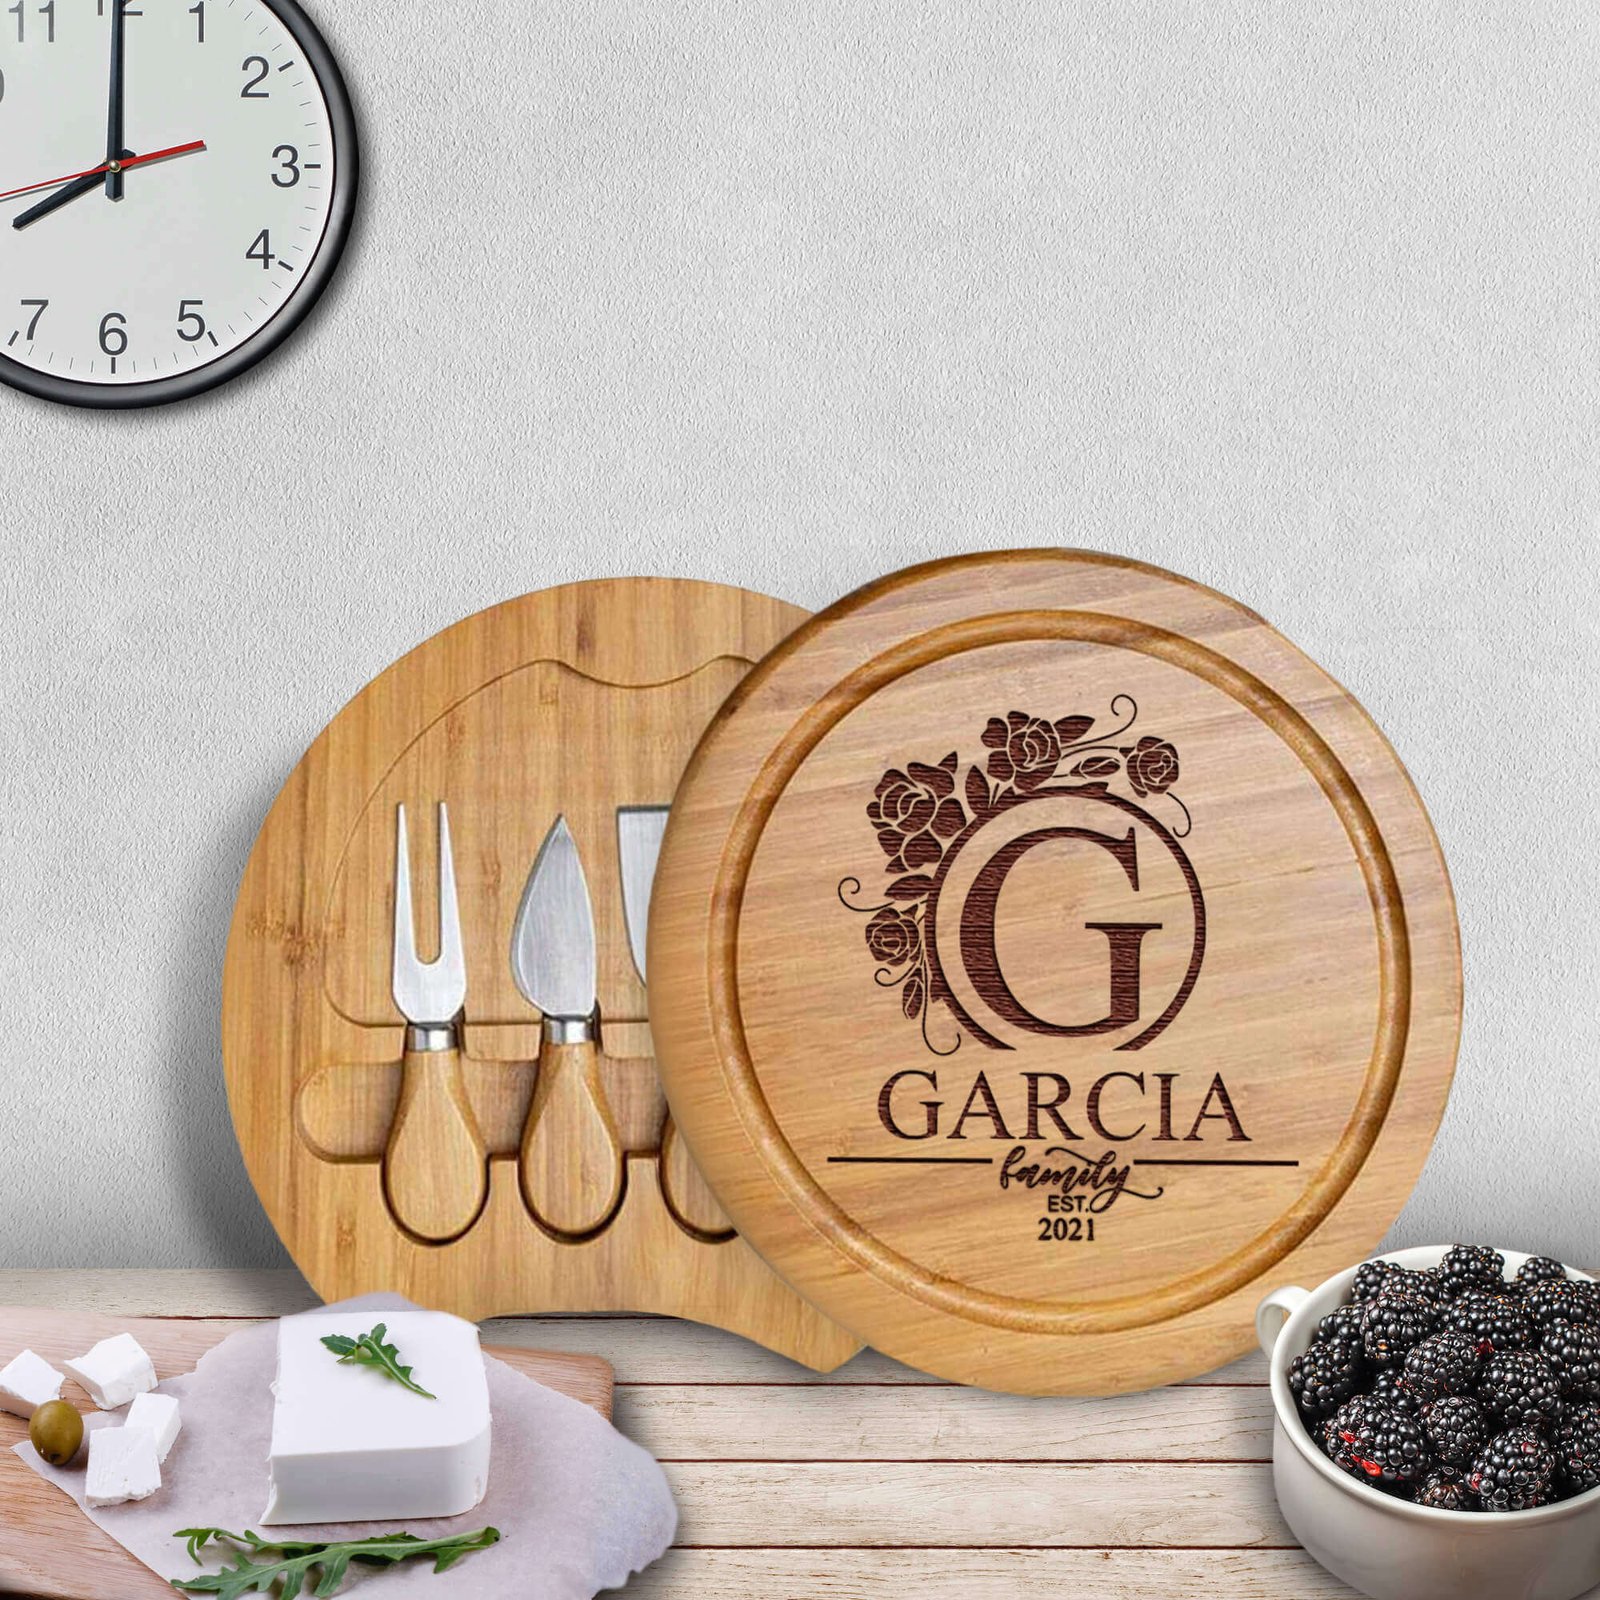 https://www.asperadesign.store/wp-content/uploads/2021/11/1.-Personalized-Housewarming-Gifts-Engraved-Cutting-Boards-Wood-Cutting-Board-and-the-Best-Knife-Set-for-Cheese-Board-Mastery-Aspera-Design.jpg